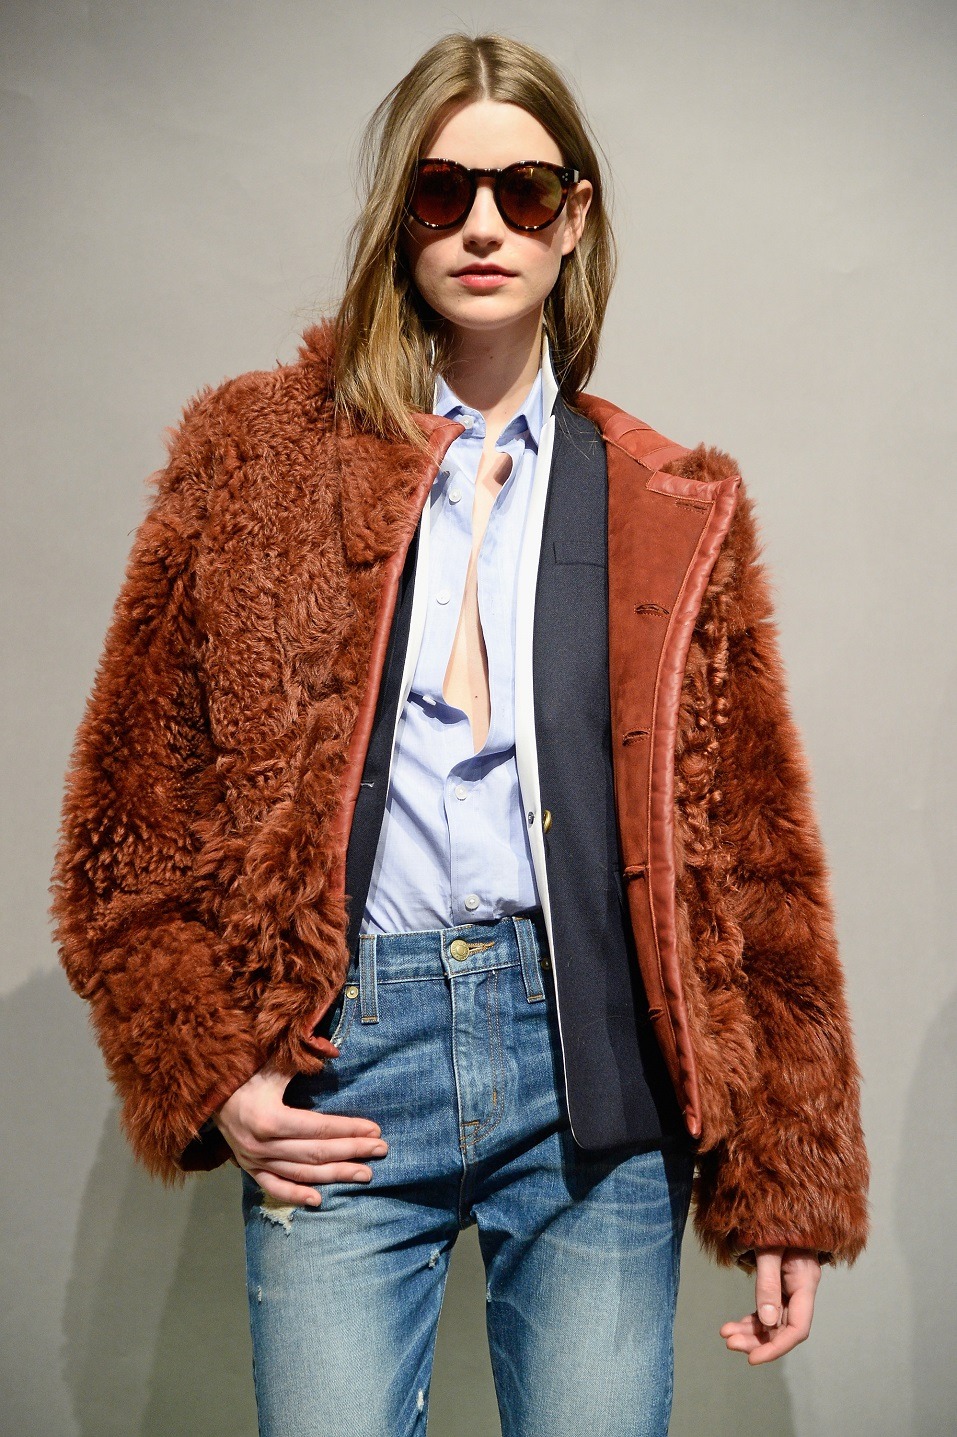 A model poses at the J.Crew presentation during Mercedes-Benz Fashion Week Fall 2015